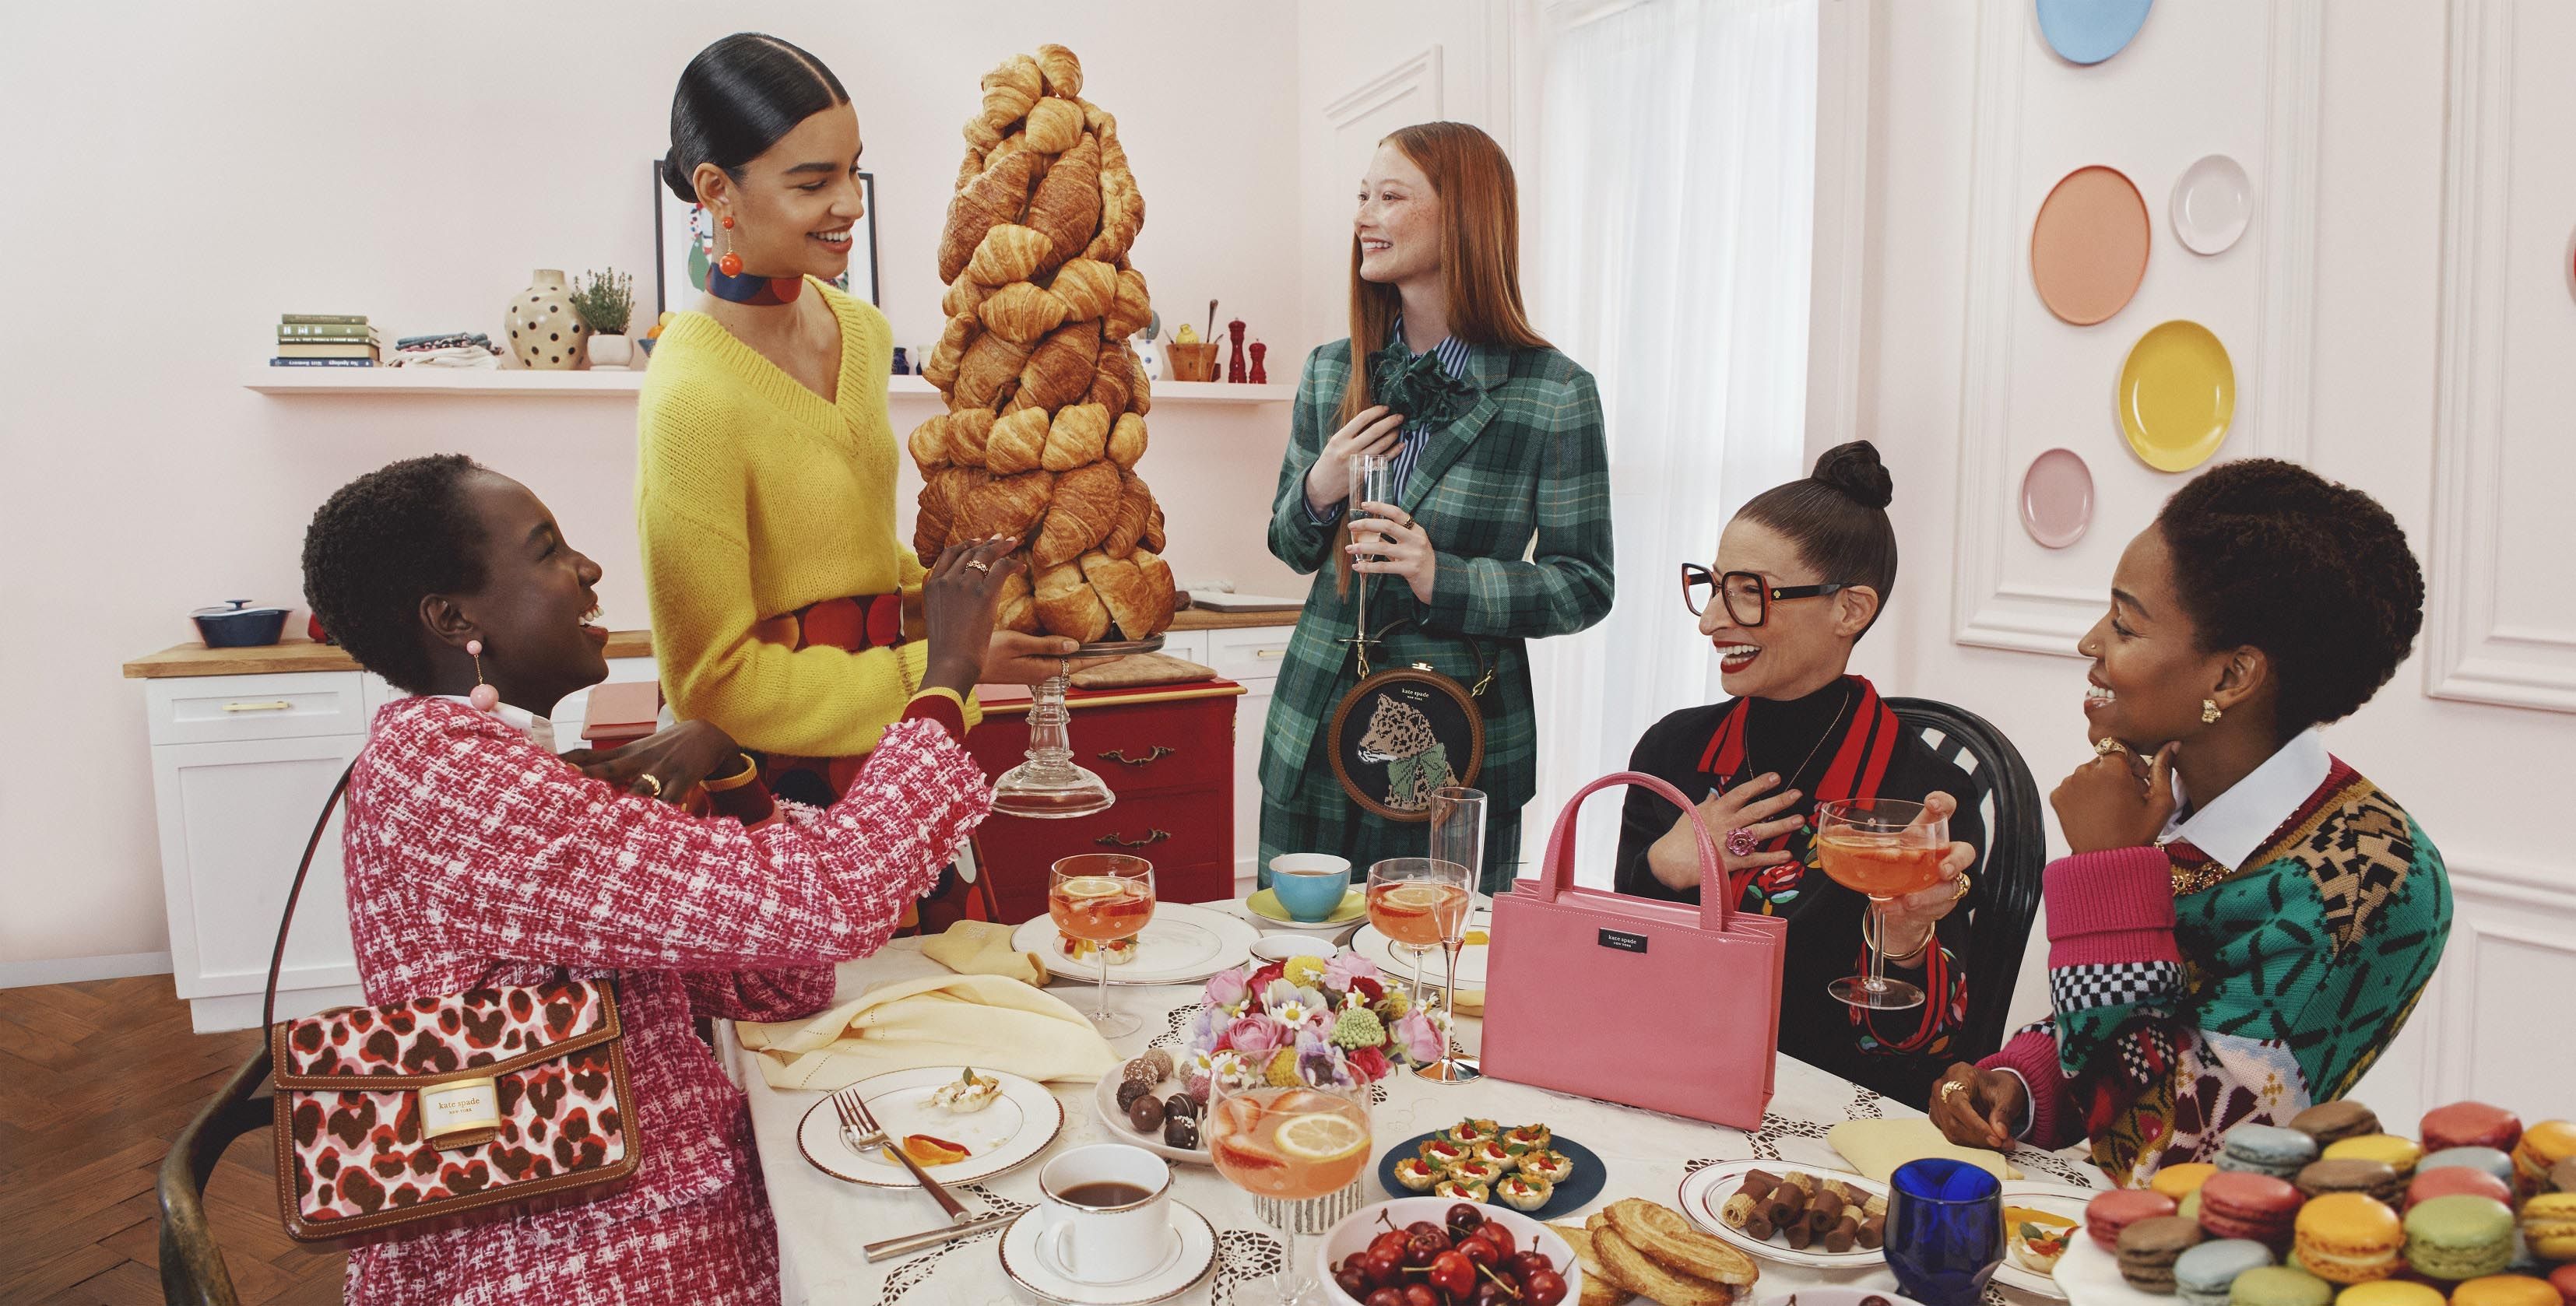 Enjoy Fall at the Kate Spade New York Campaign